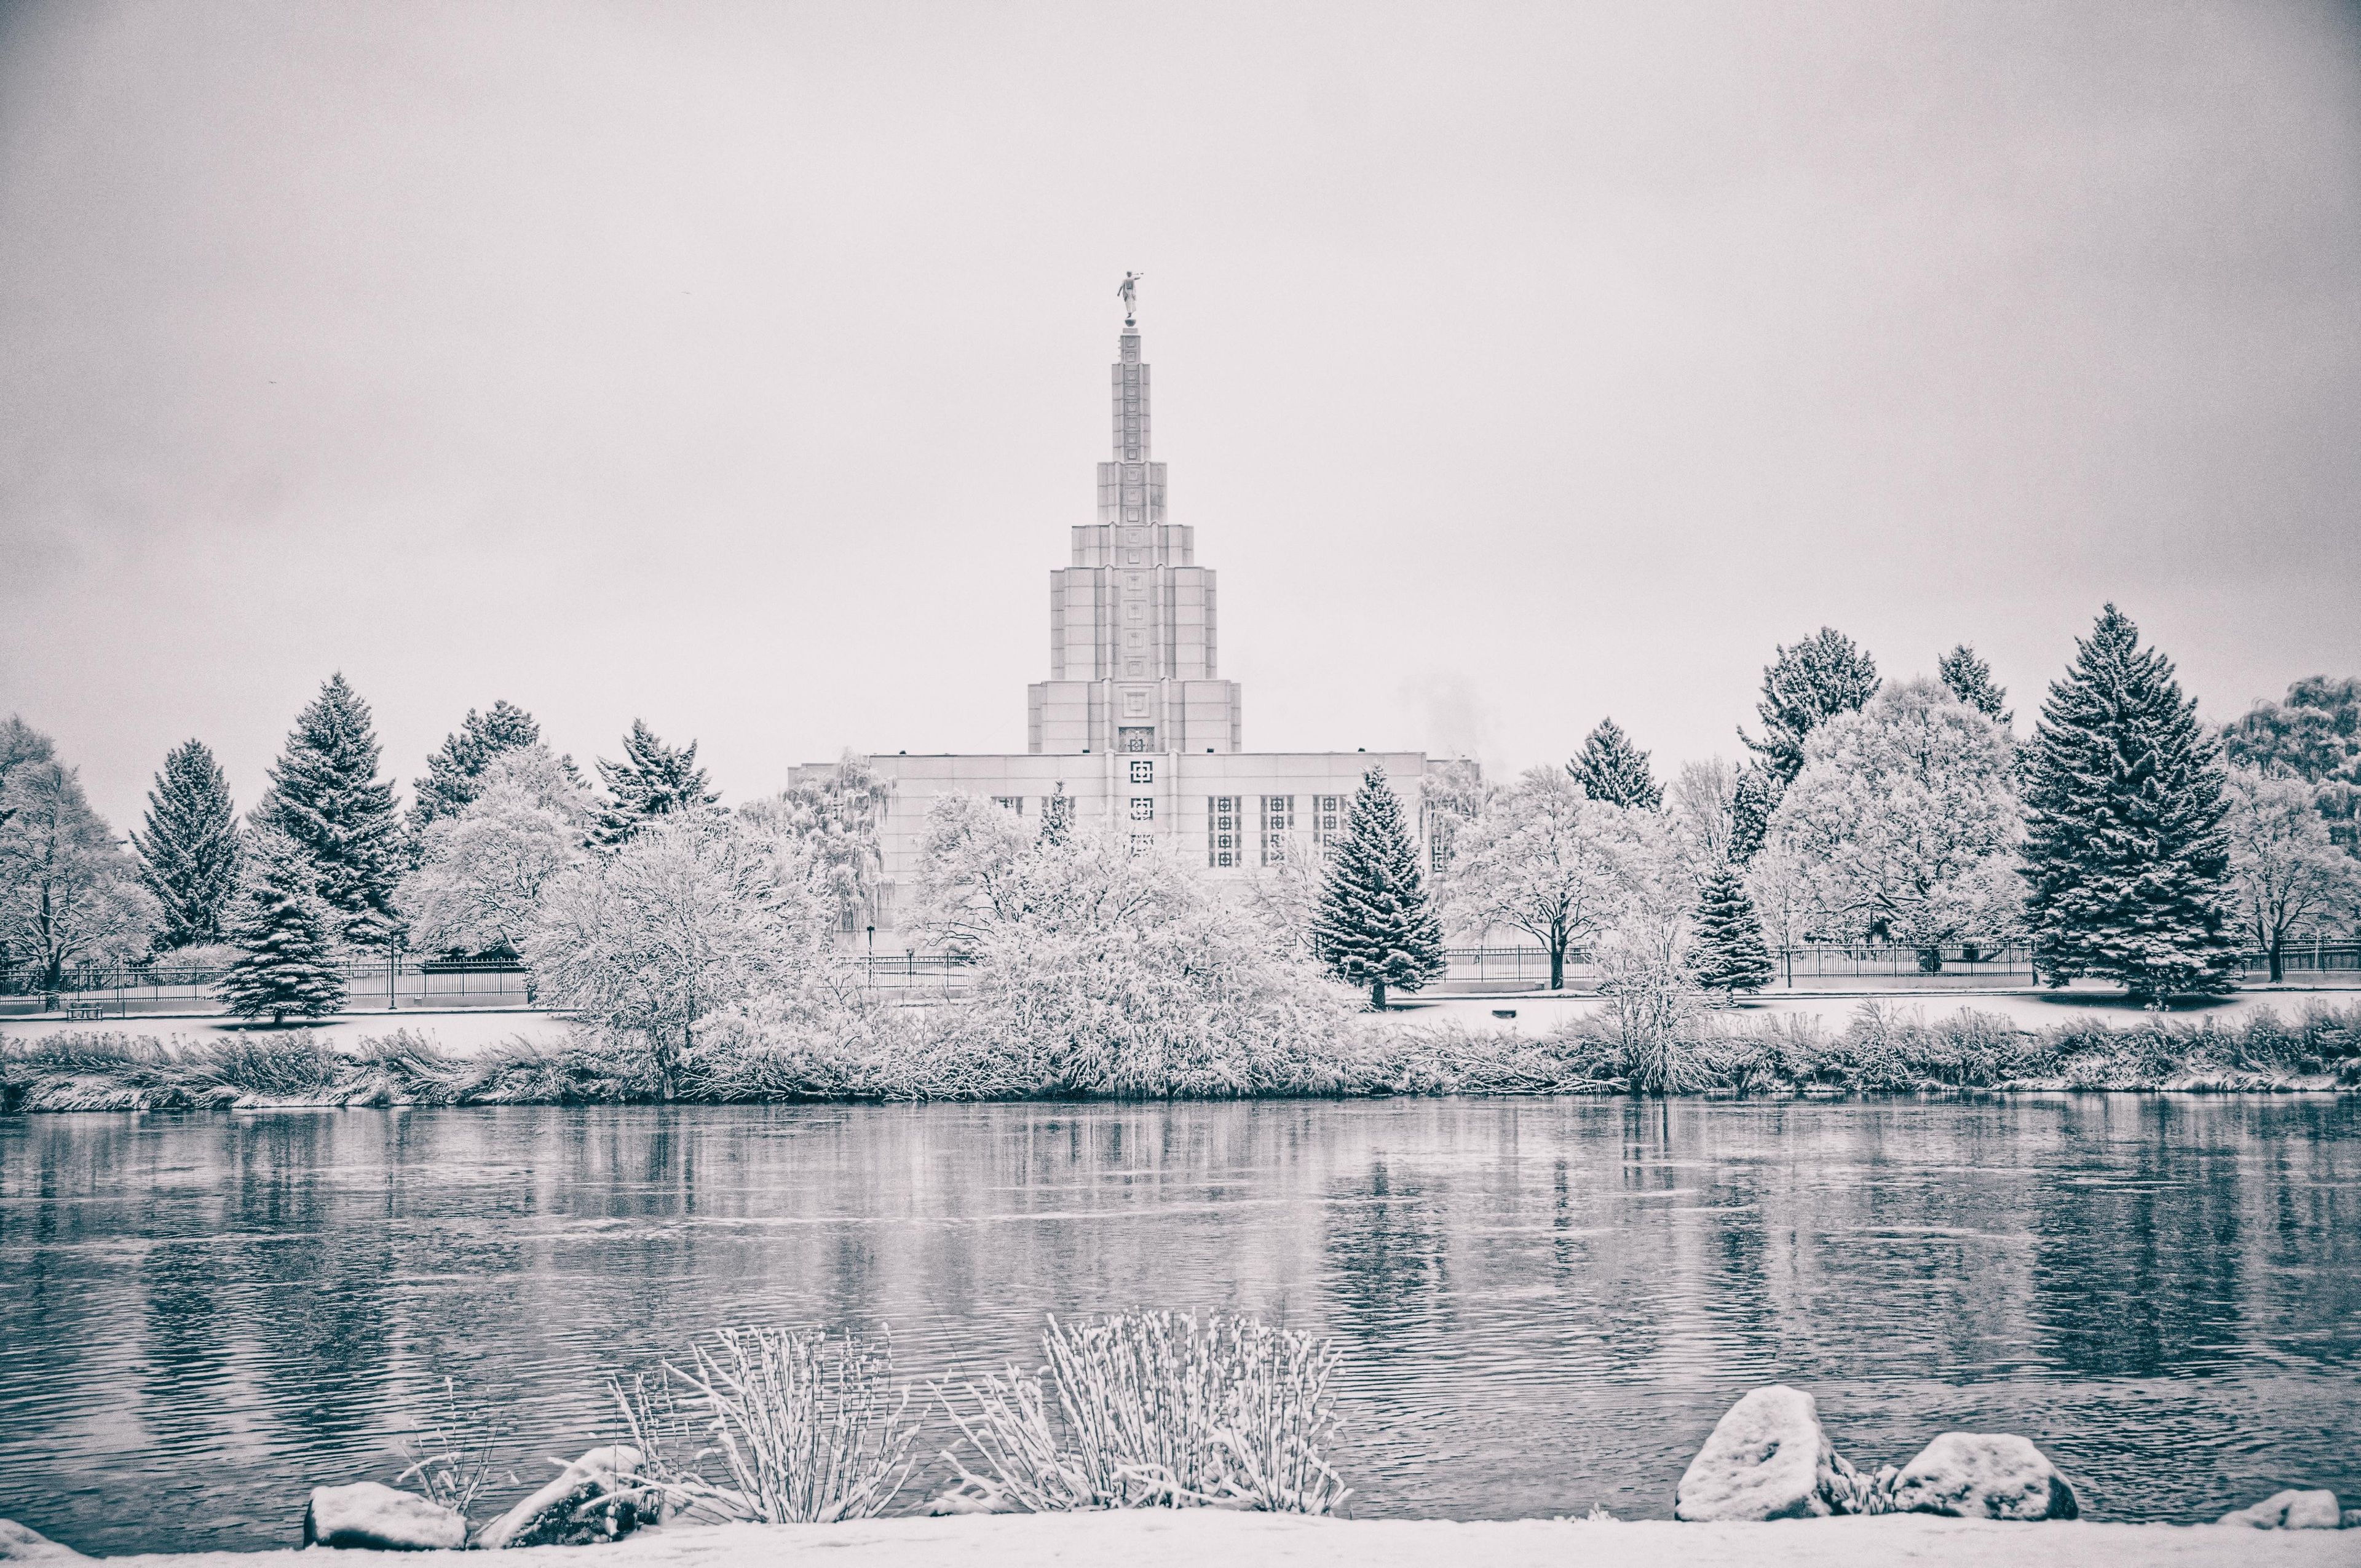 The Idaho Falls Idaho Temple and grounds covered in snow in the winter.